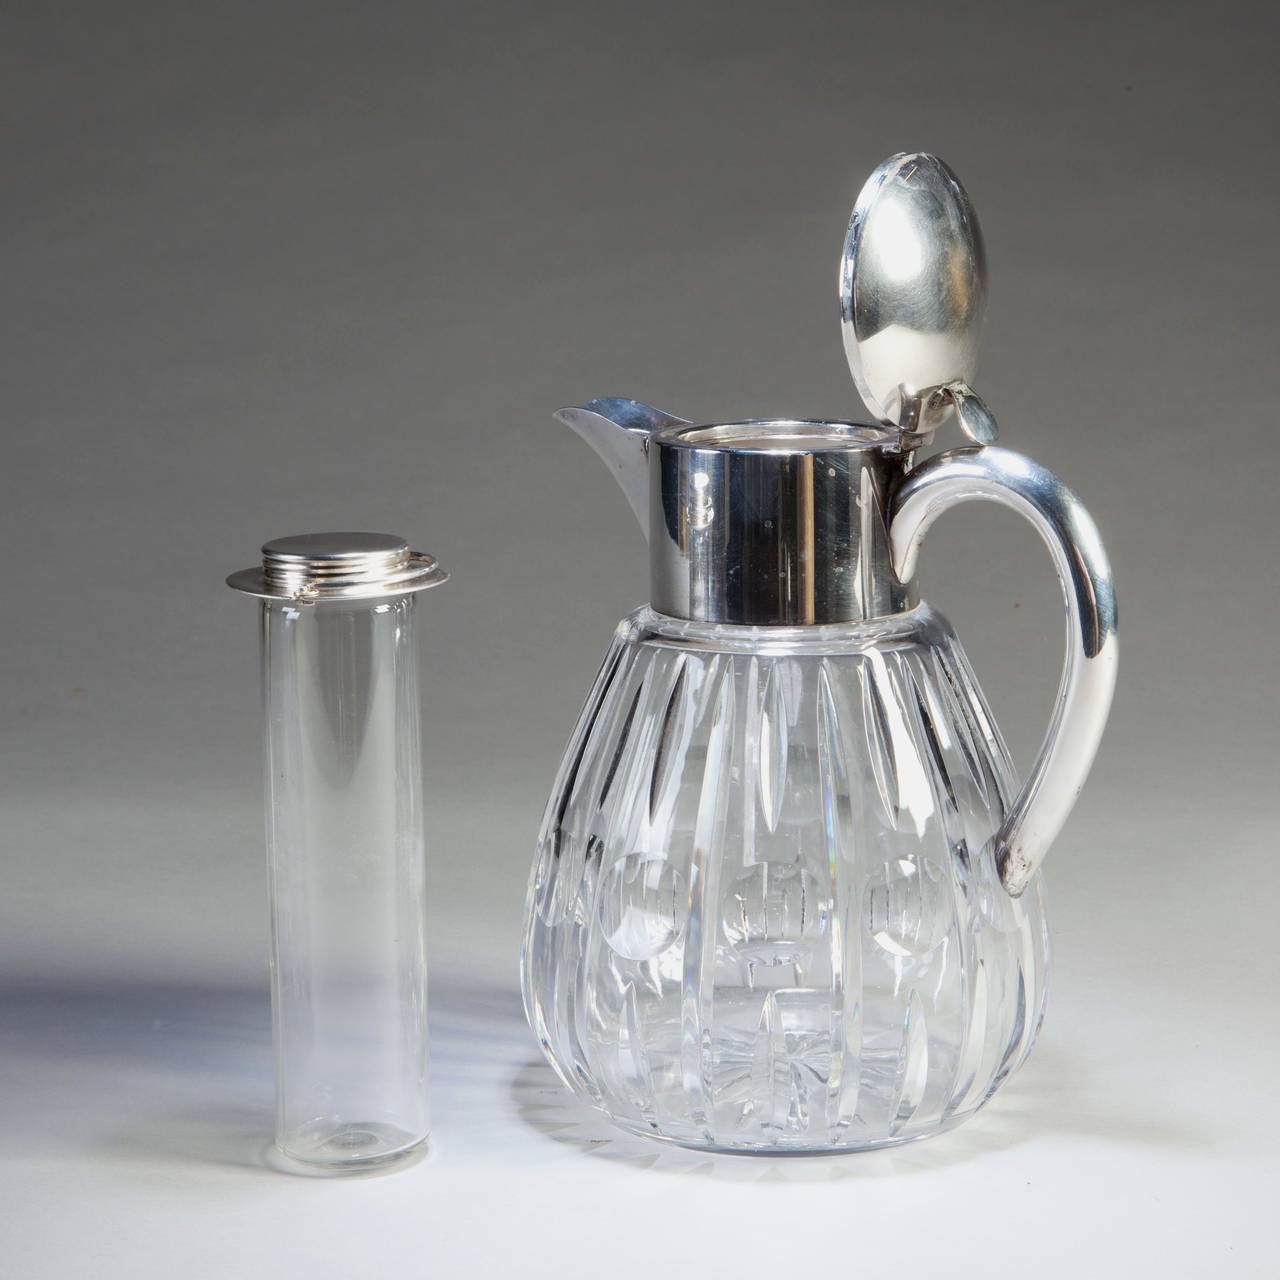 A large scale Edwardian cut-glass and silver plate lemonade jug having a boldly modeled handle, the top open to reveal a removable ice container. Indistinctly stamped under the handle.